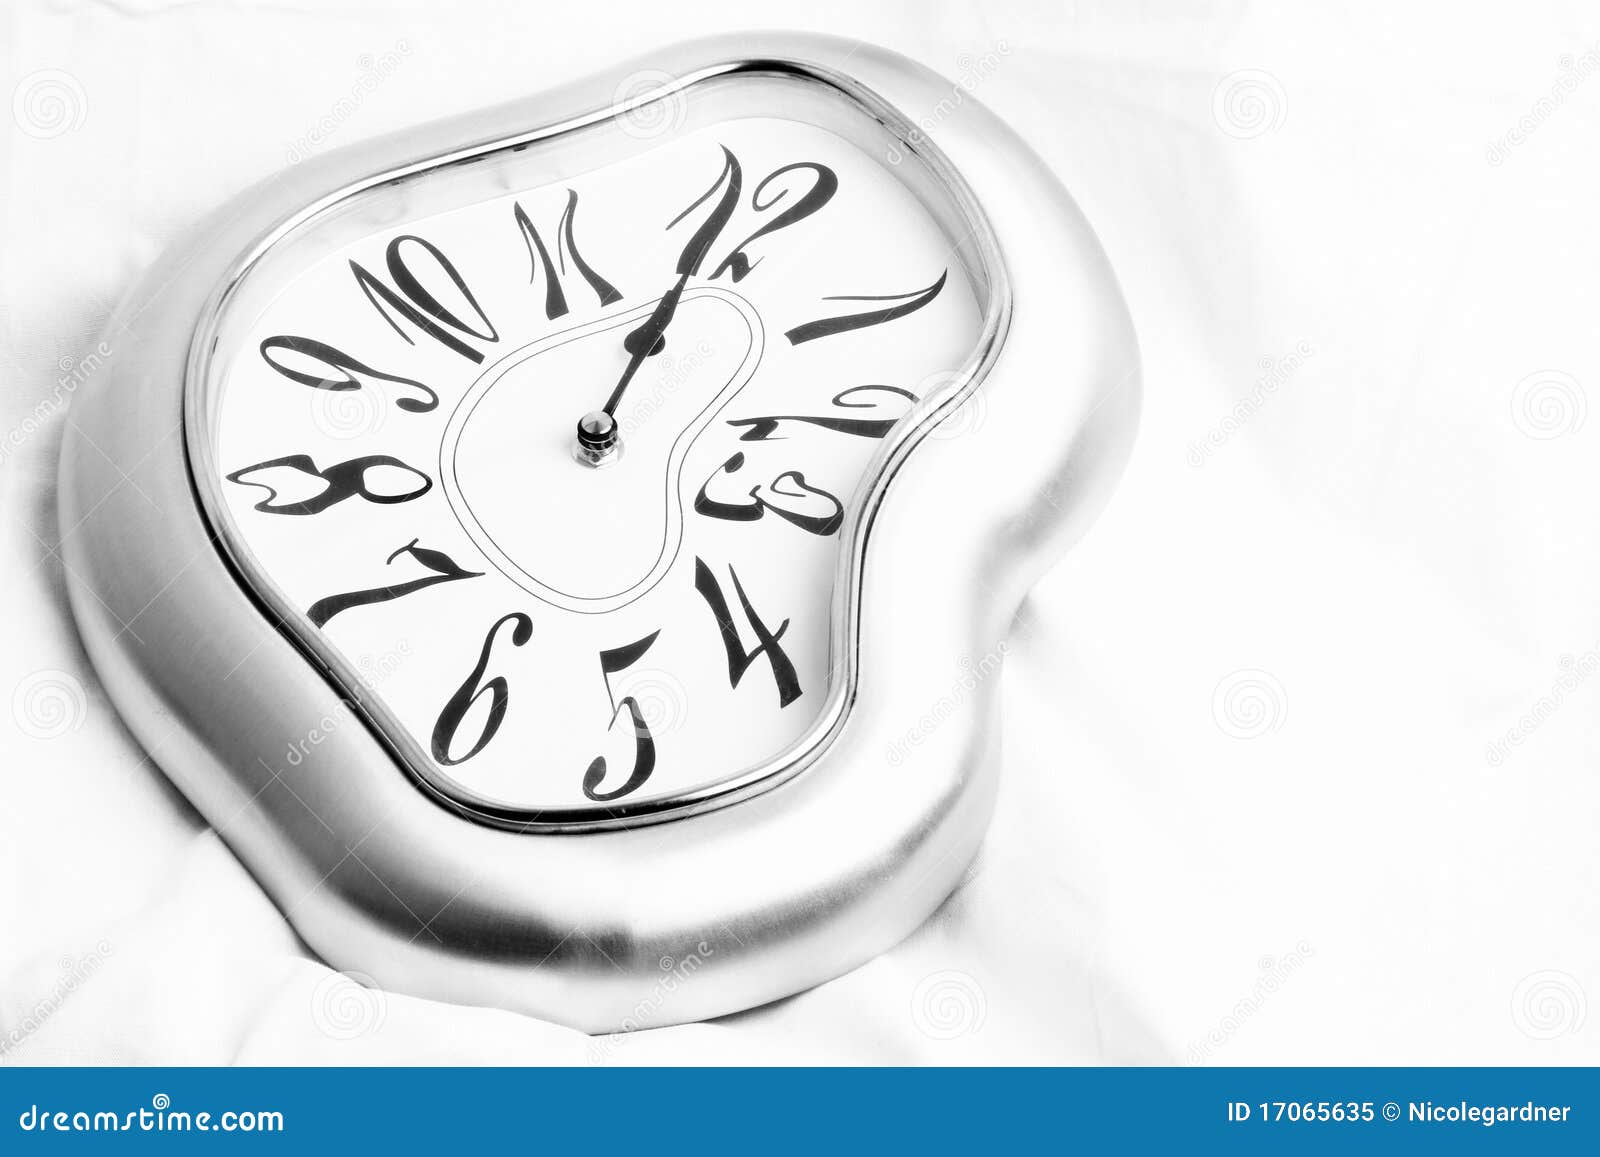 silver melted clock